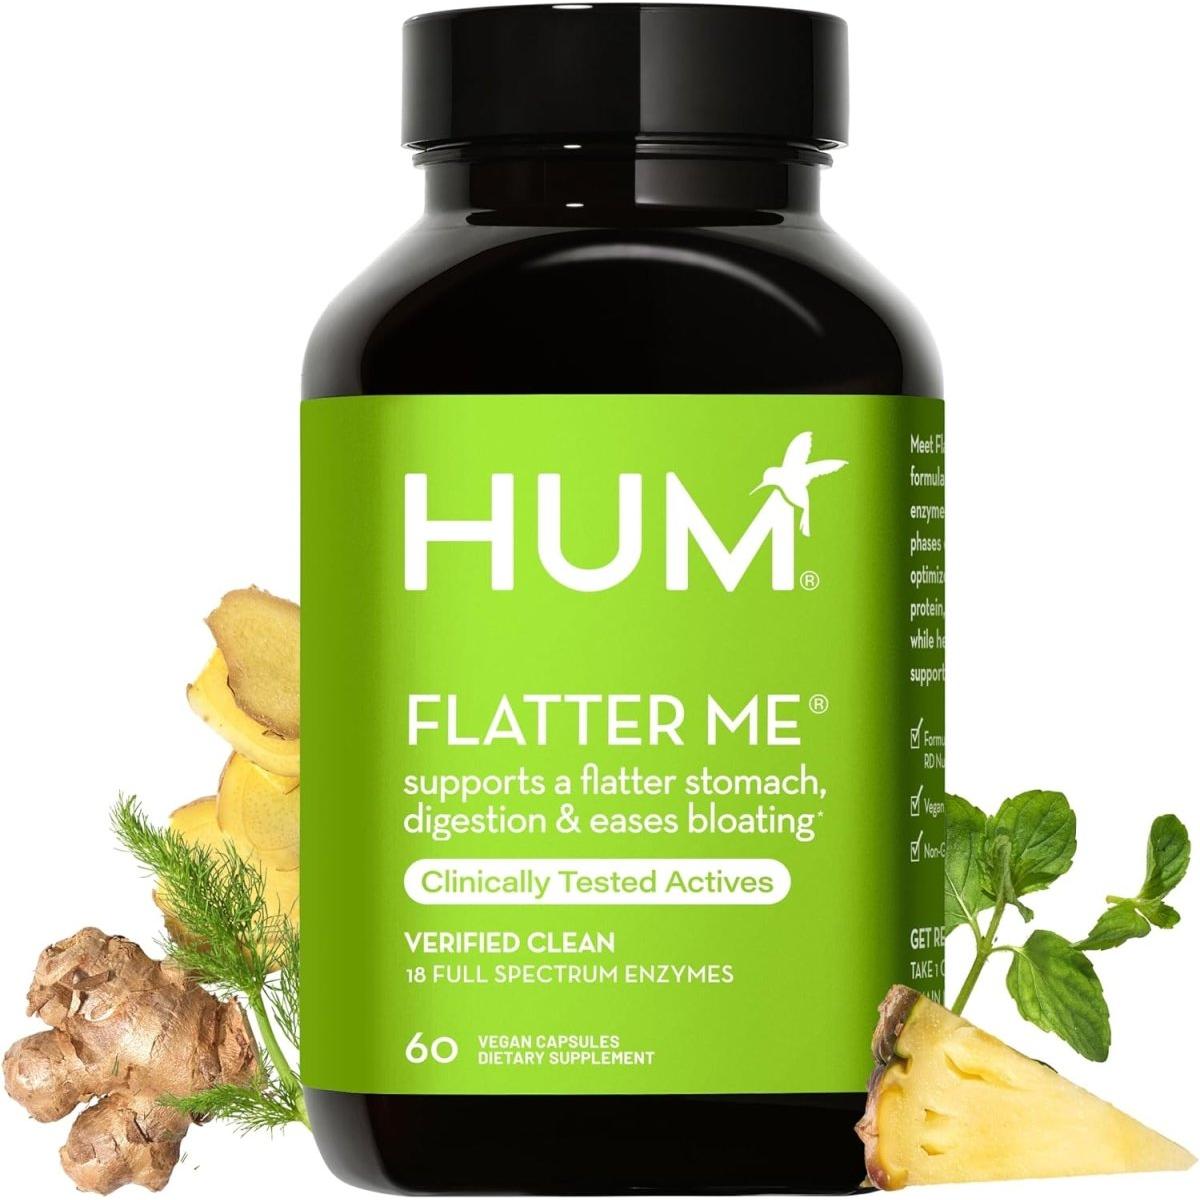 Hum Flatter Me Supplement for Daily Bloating - (30-Day Supply) - Glam Global UK